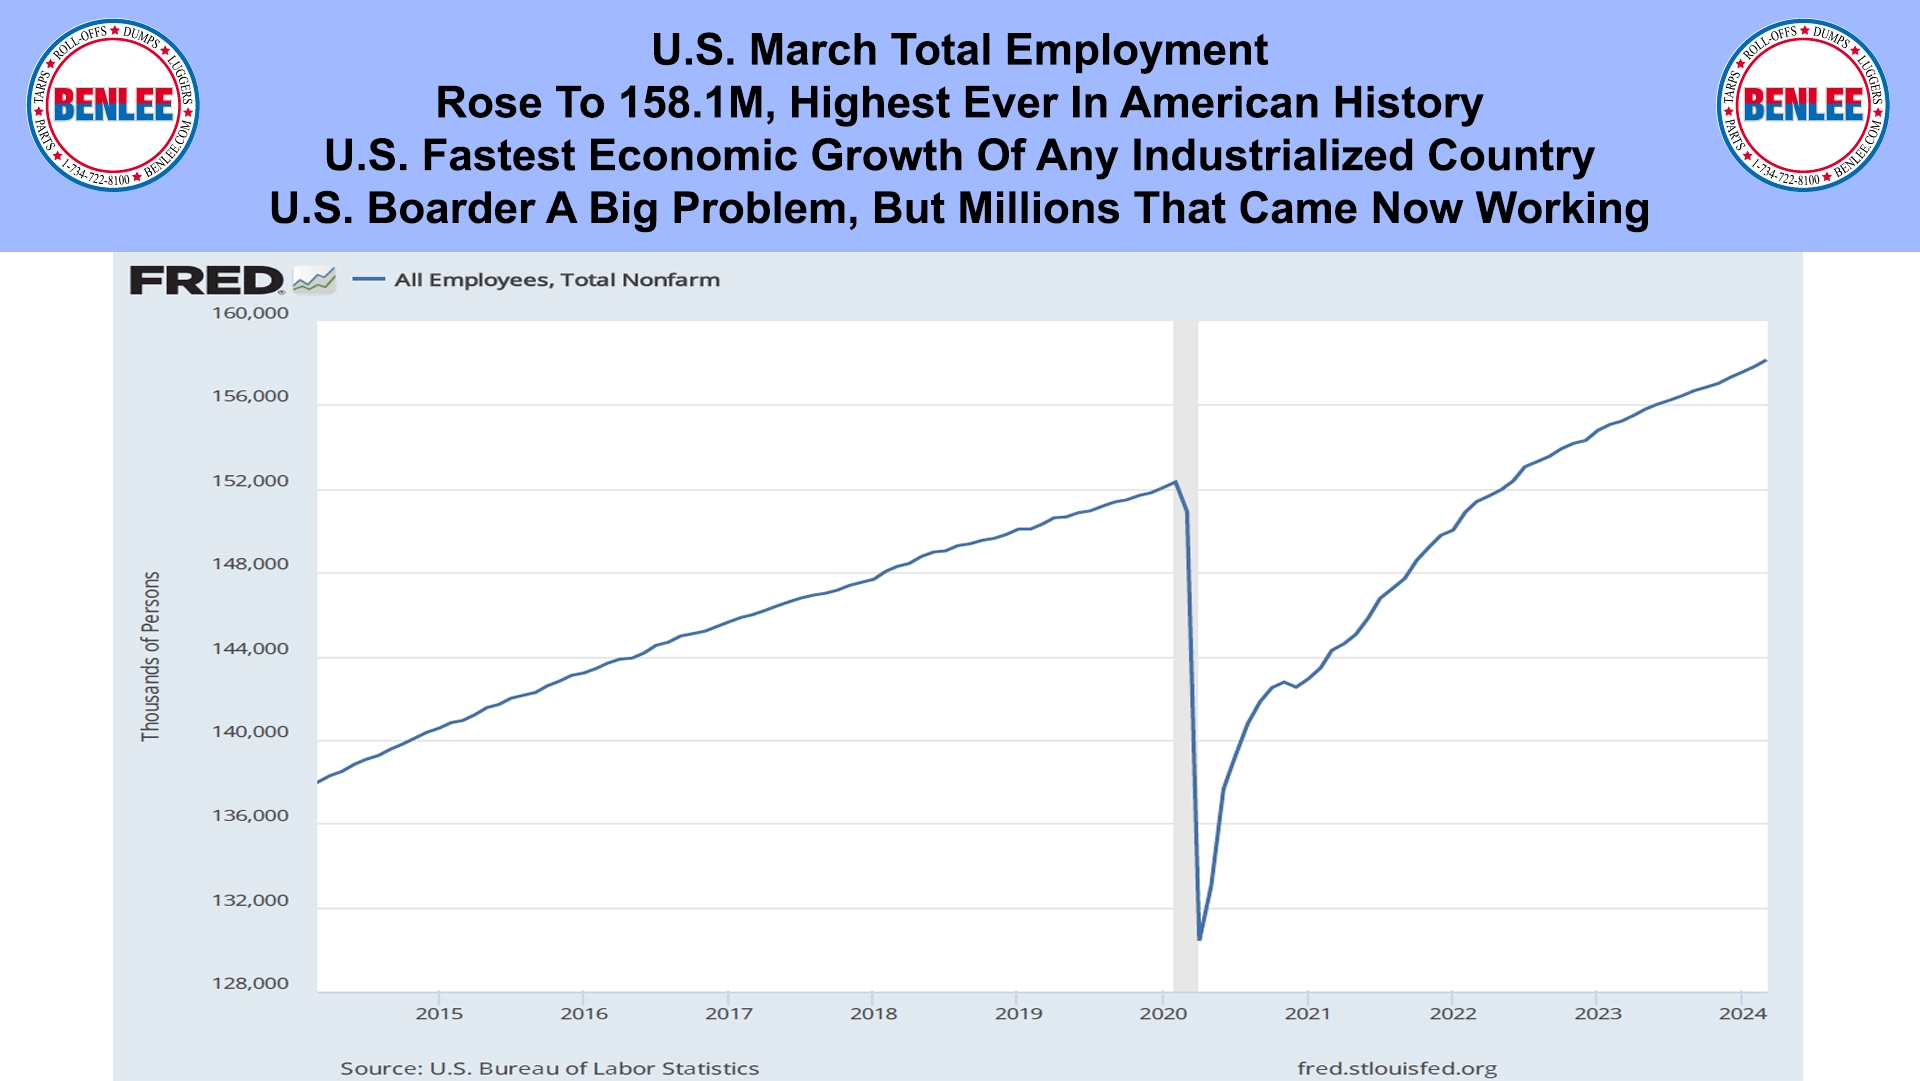 U.S. March Total Employment